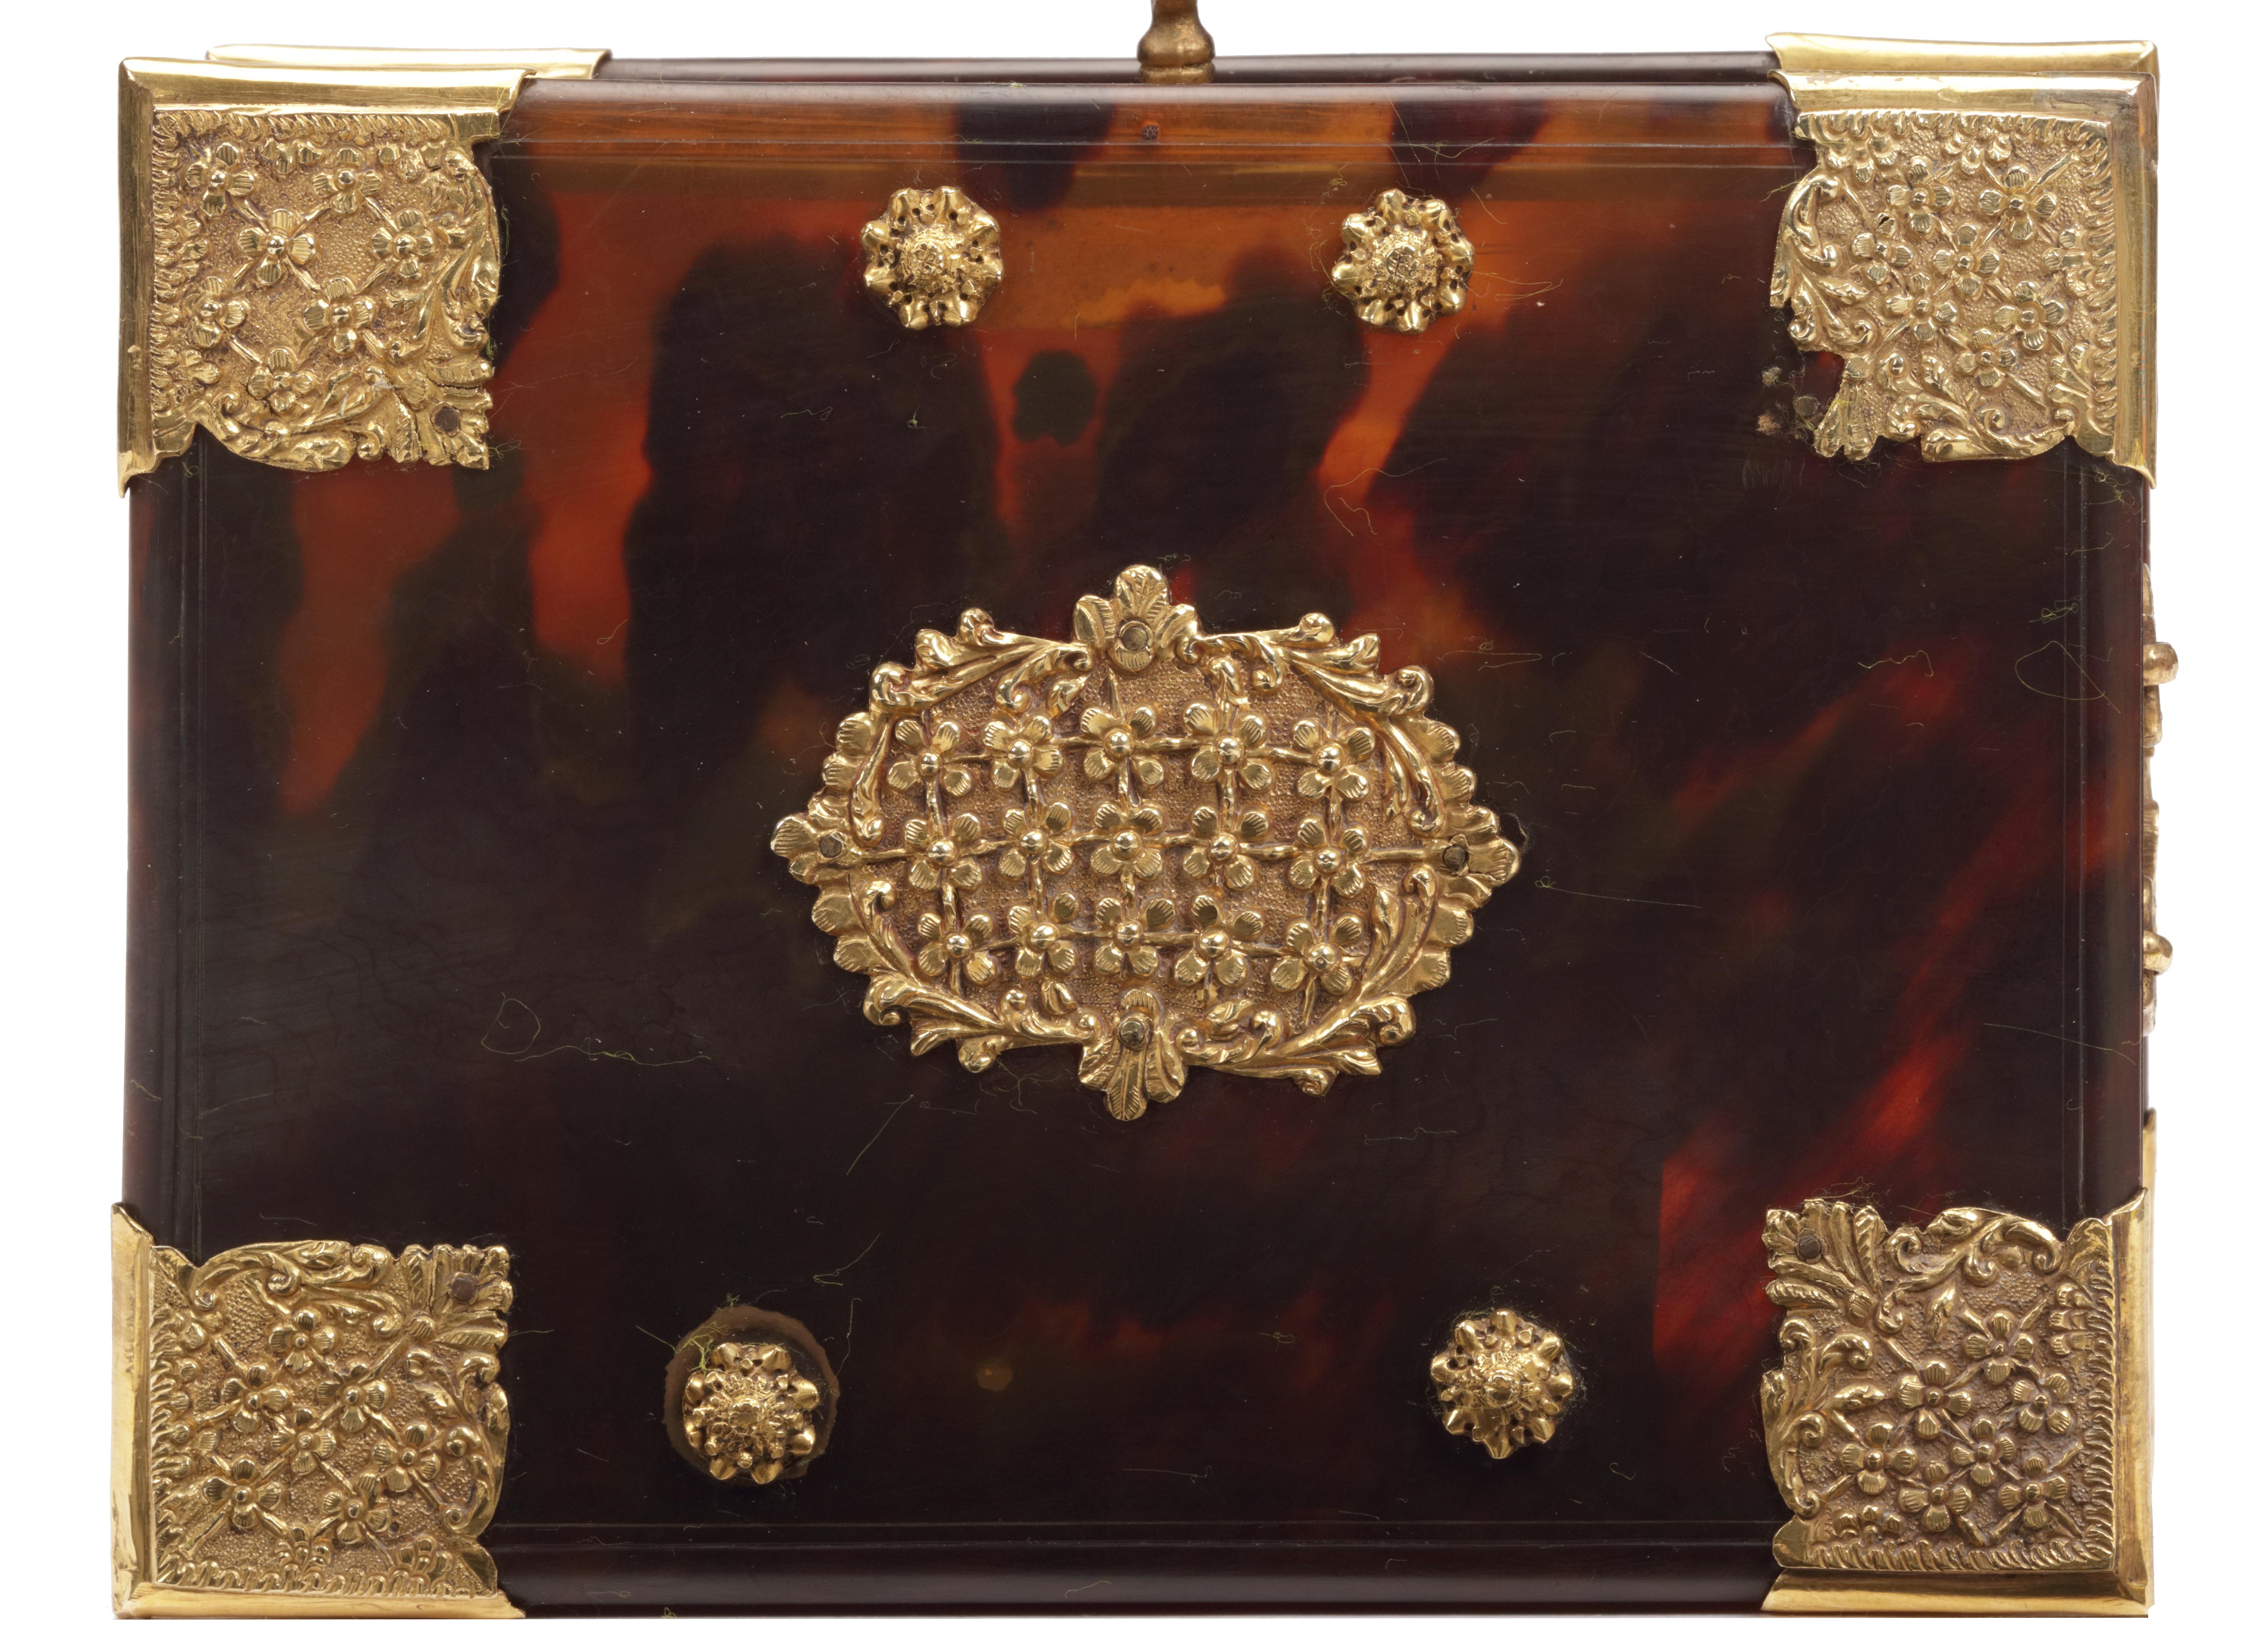 Dutch Colonial A small Dutch colonial Indonesian tortoiseshell betel box with gold mounts For Sale